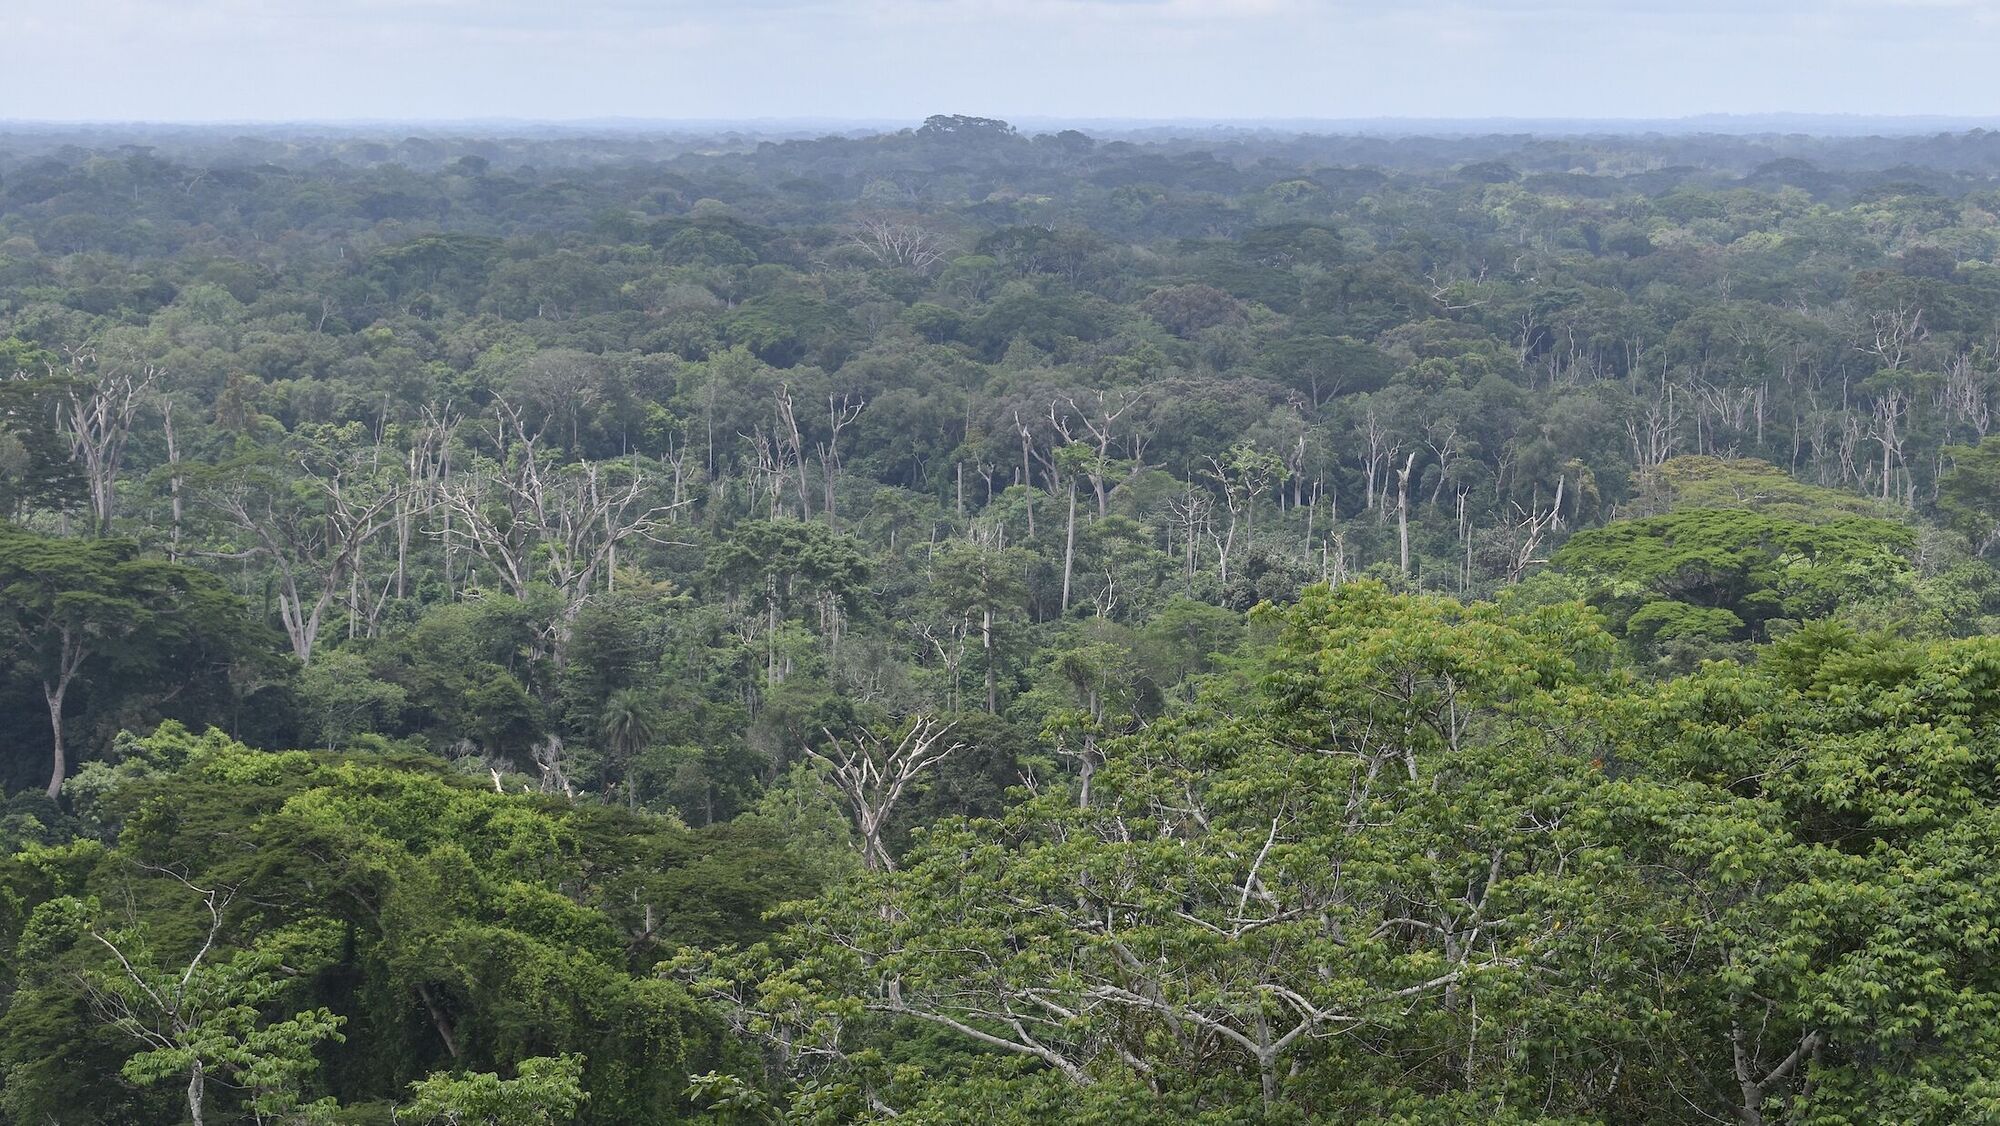 The Cavally Forest in Côte d'Ivoire